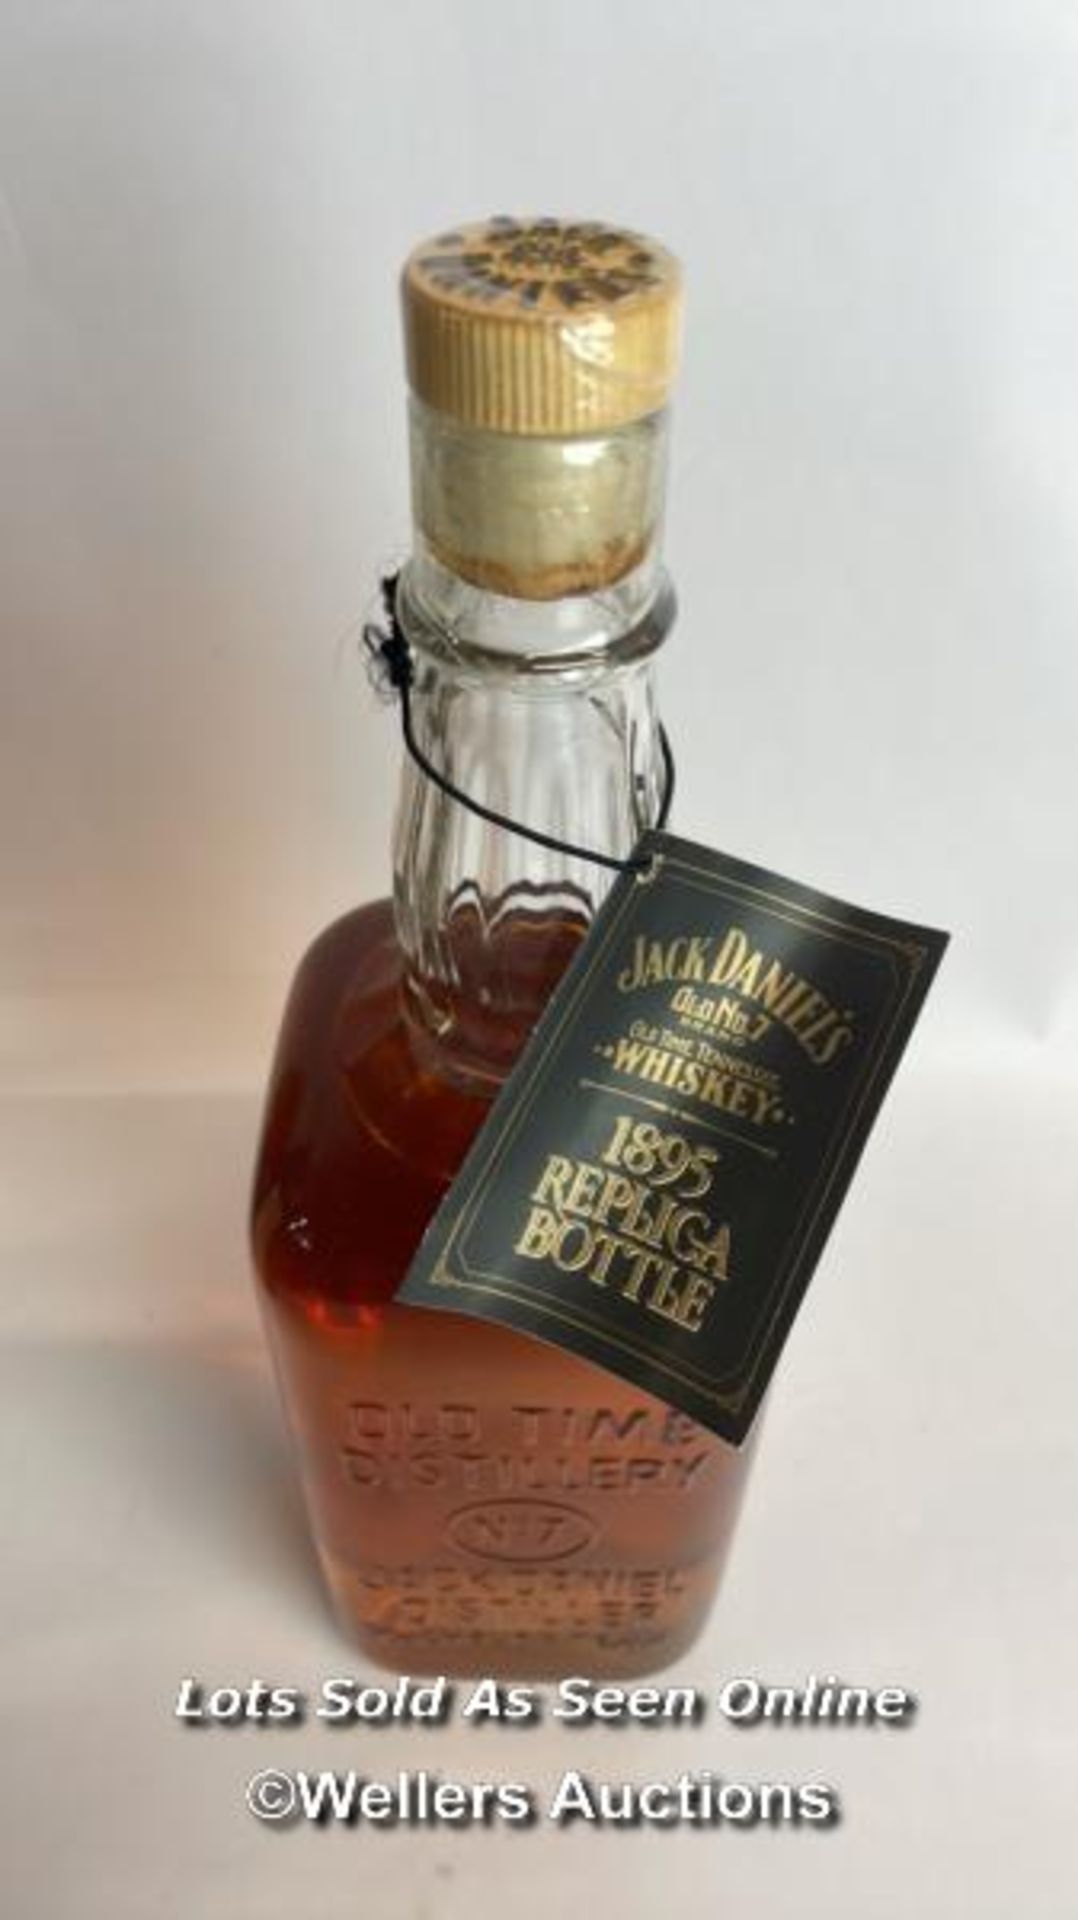 1895 Jack Daniels Replica Bottle, Old No.7 Brand, Old Time Tennessee Whiskey, 1L, 43% vol / Please - Image 6 of 7